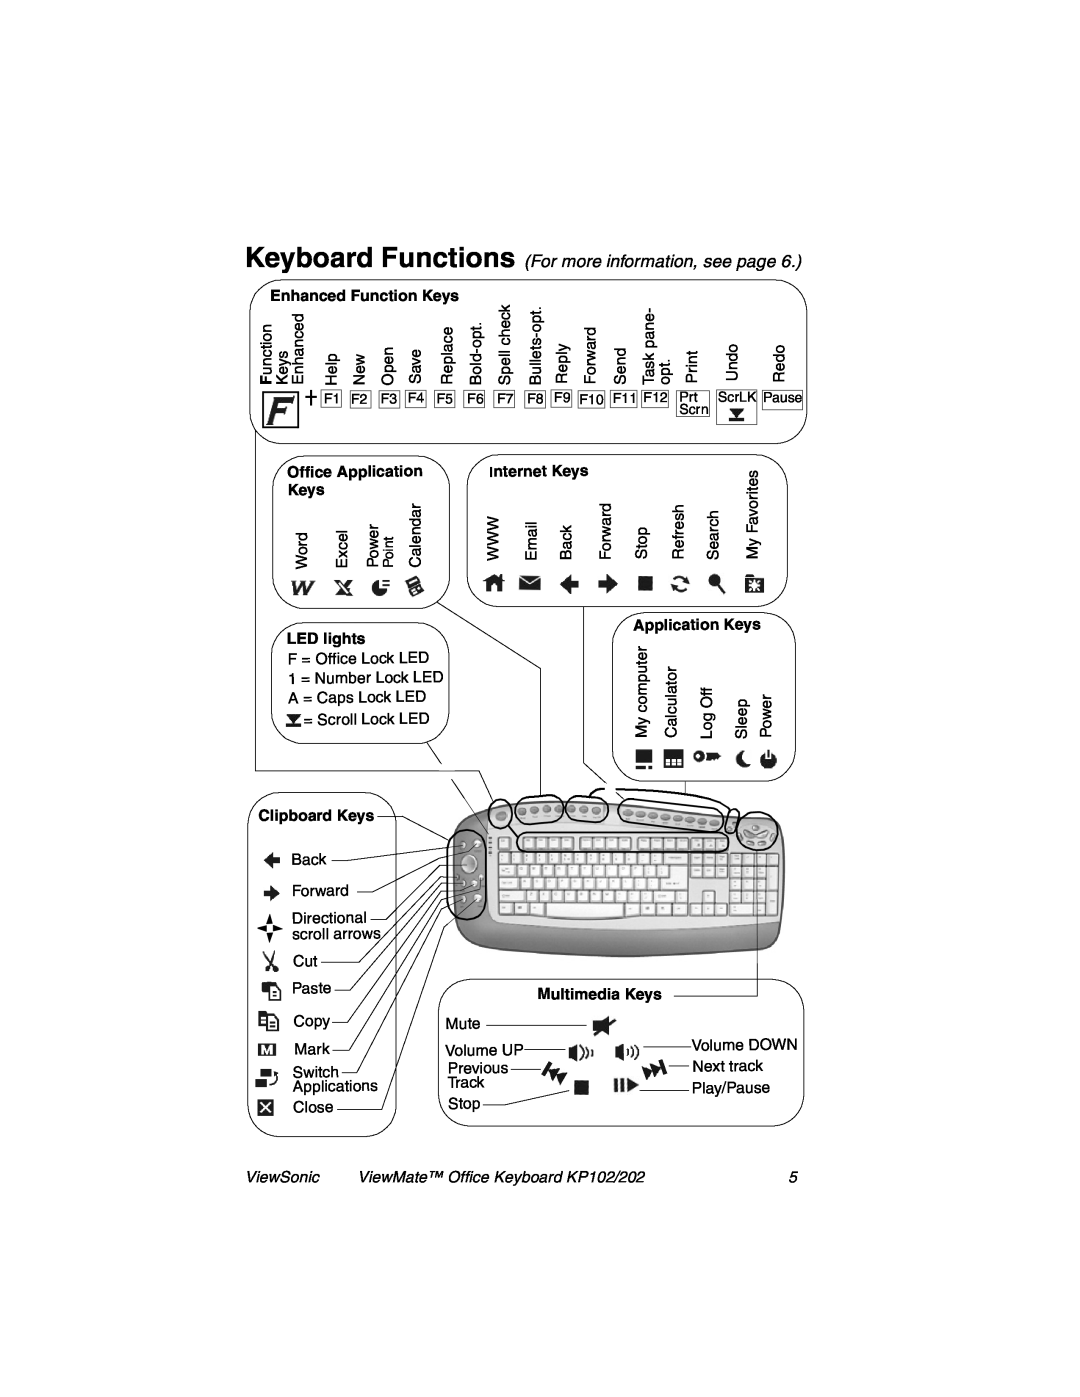 ViewSonic KP202 Keyboard Functions For more information, see page, Enhanced Function Keys, Office Application, LED lights 